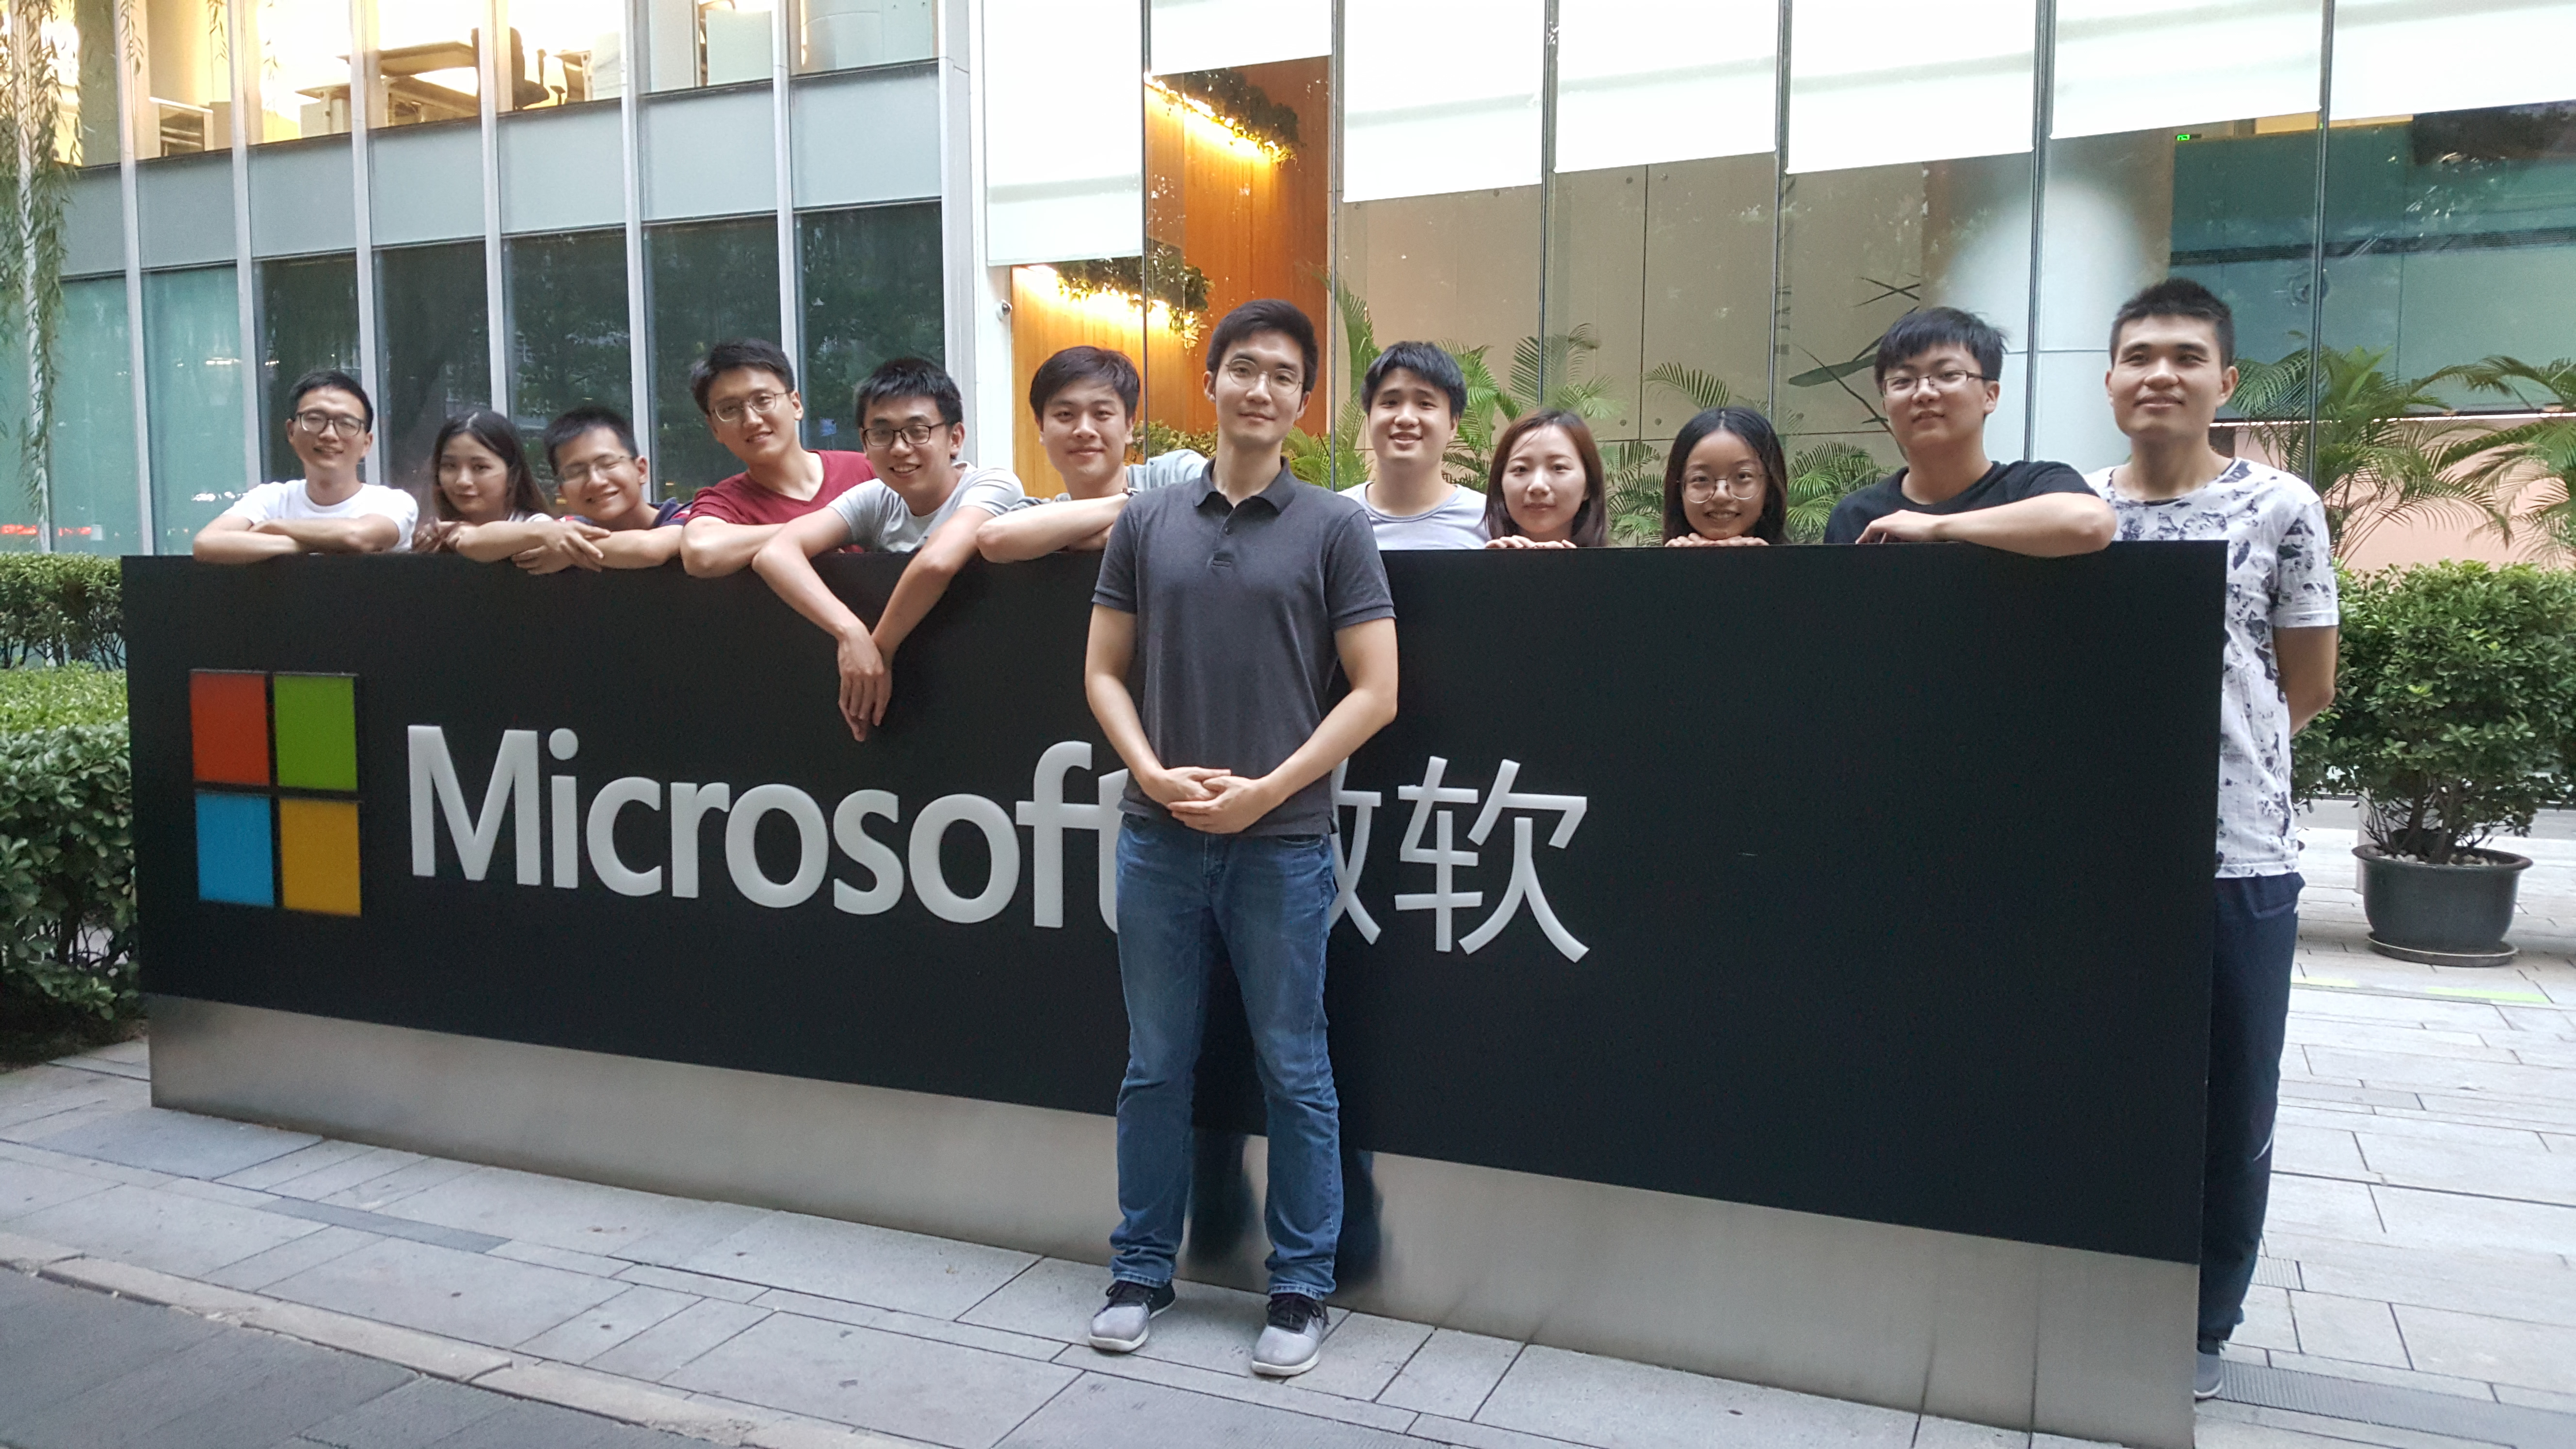 Above: MSRA dining group taking a photo in front of the Microsoft logo under Building 2